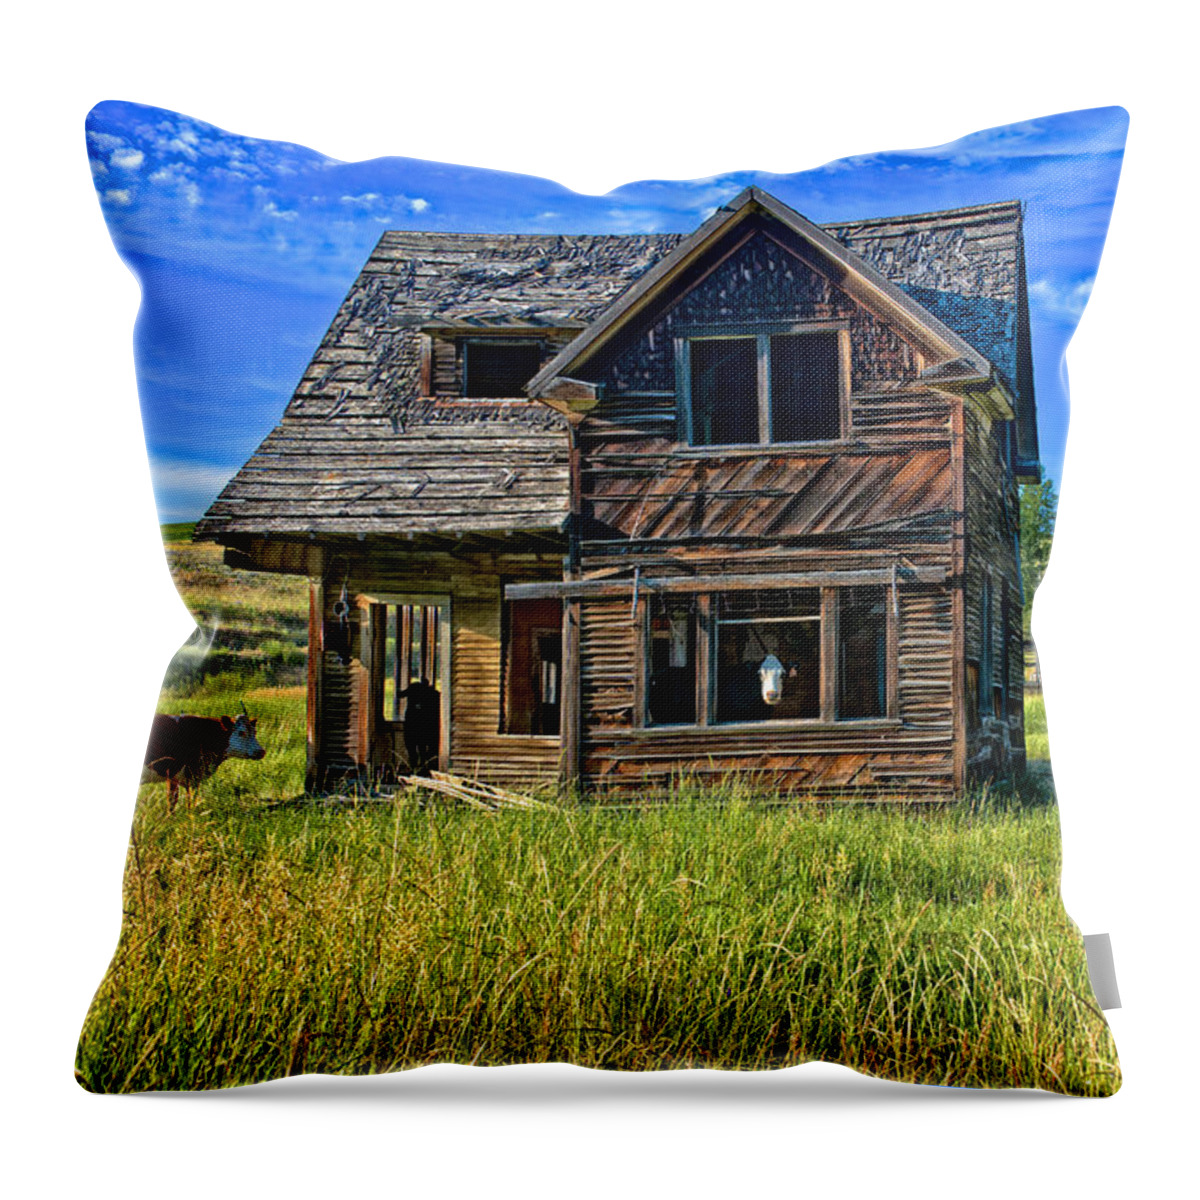 Cow Throw Pillow featuring the photograph Cow House by Ed Broberg